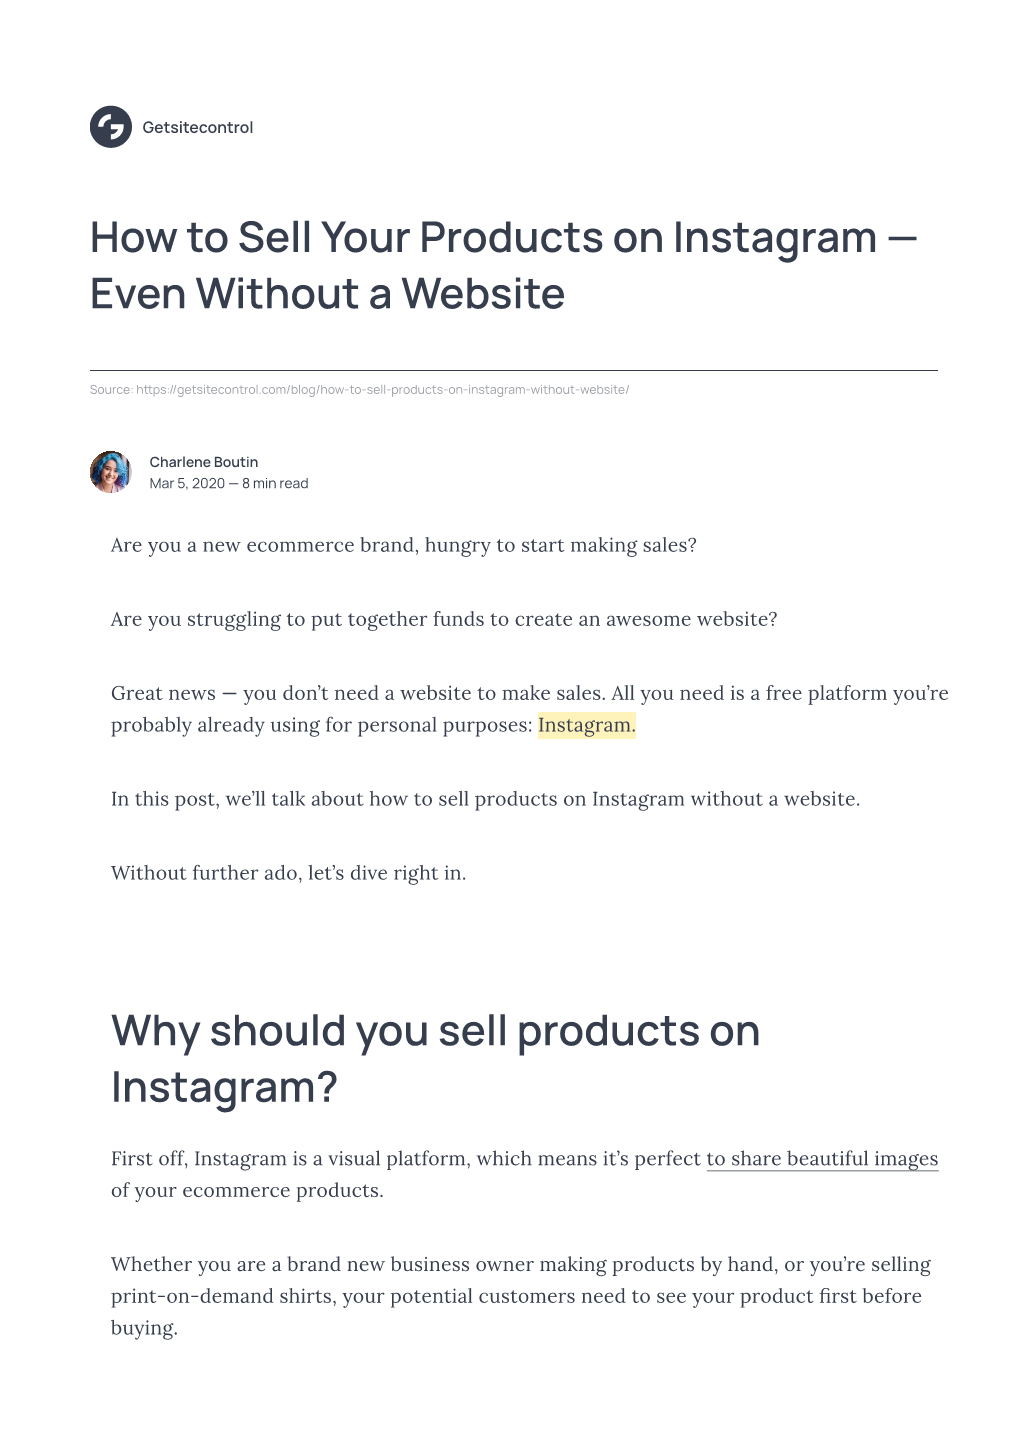 How to Sell Your Products on Instagram — Even Without a Website